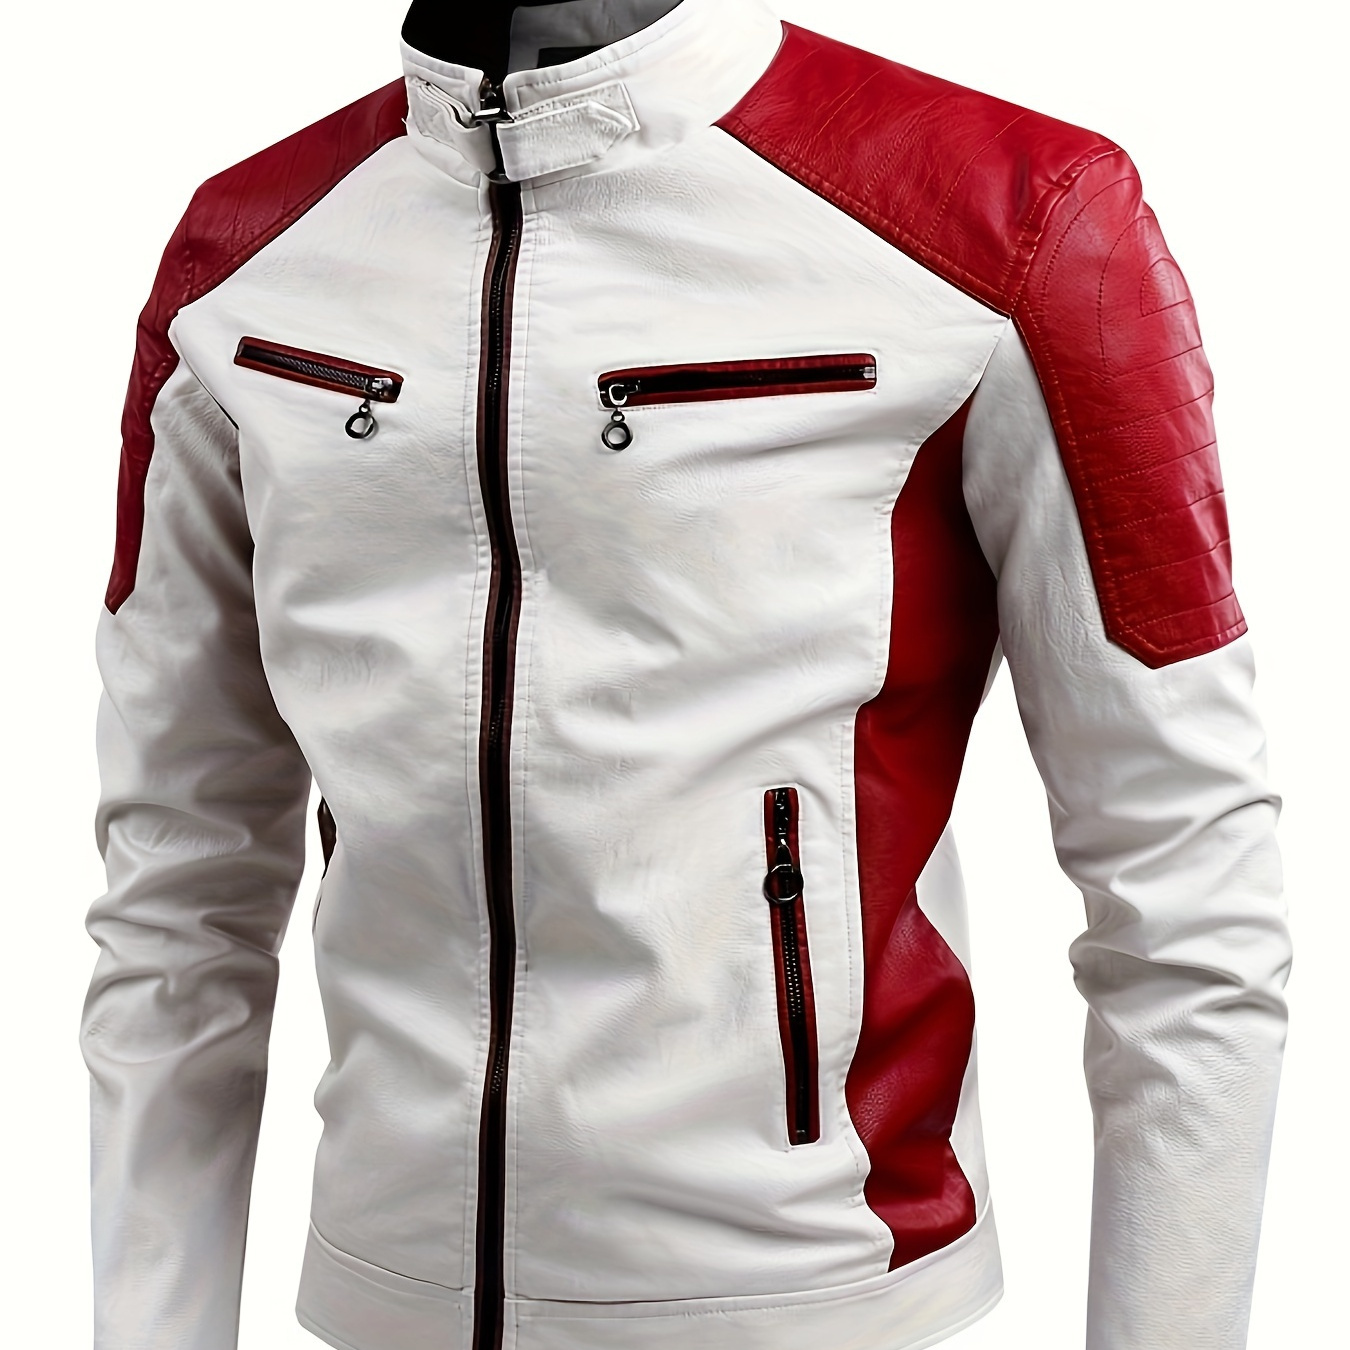 

Men's Pu Leather Color Block Jacket With Multi Zipper Pockets, Casual Stand Collar Zip Up Long Sleeve Outwear For Outdoor